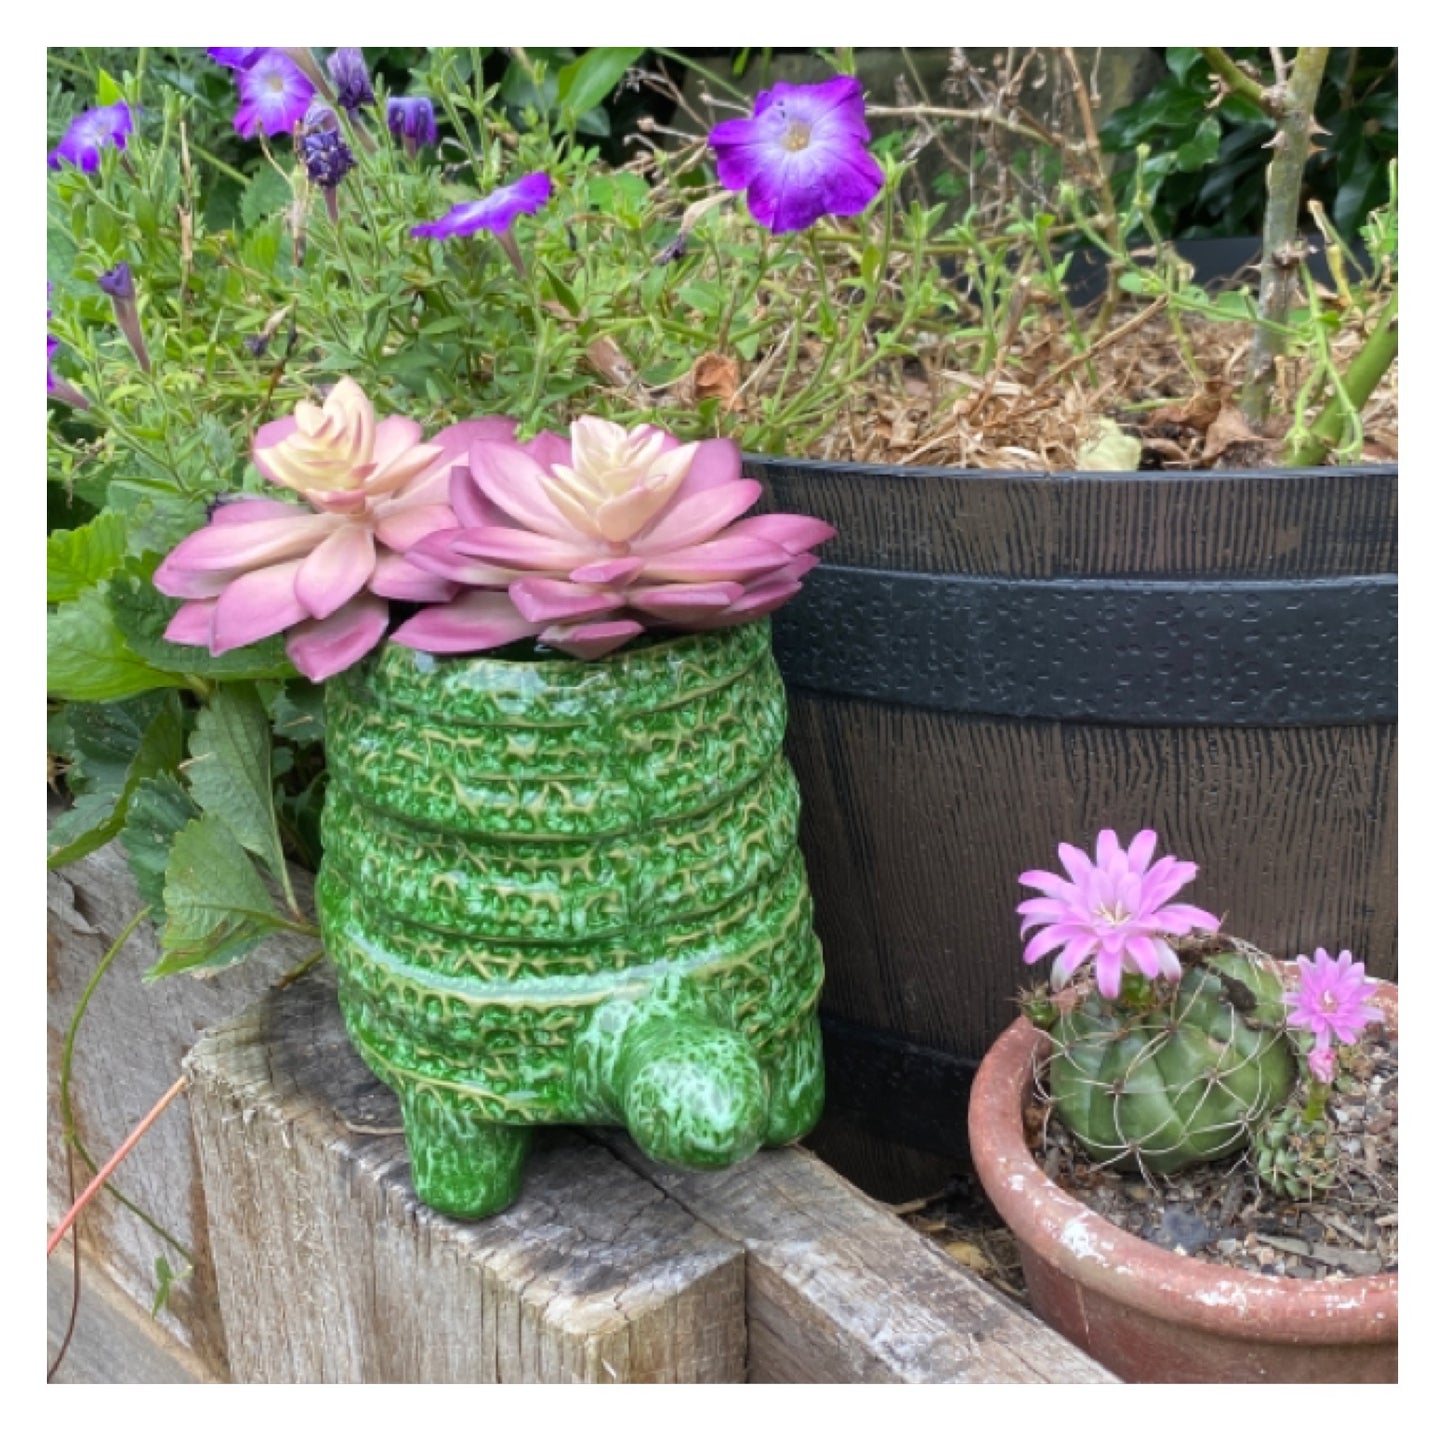 Turtle Plant Pot Planter Garden Green - The Renmy Store Homewares & Gifts 